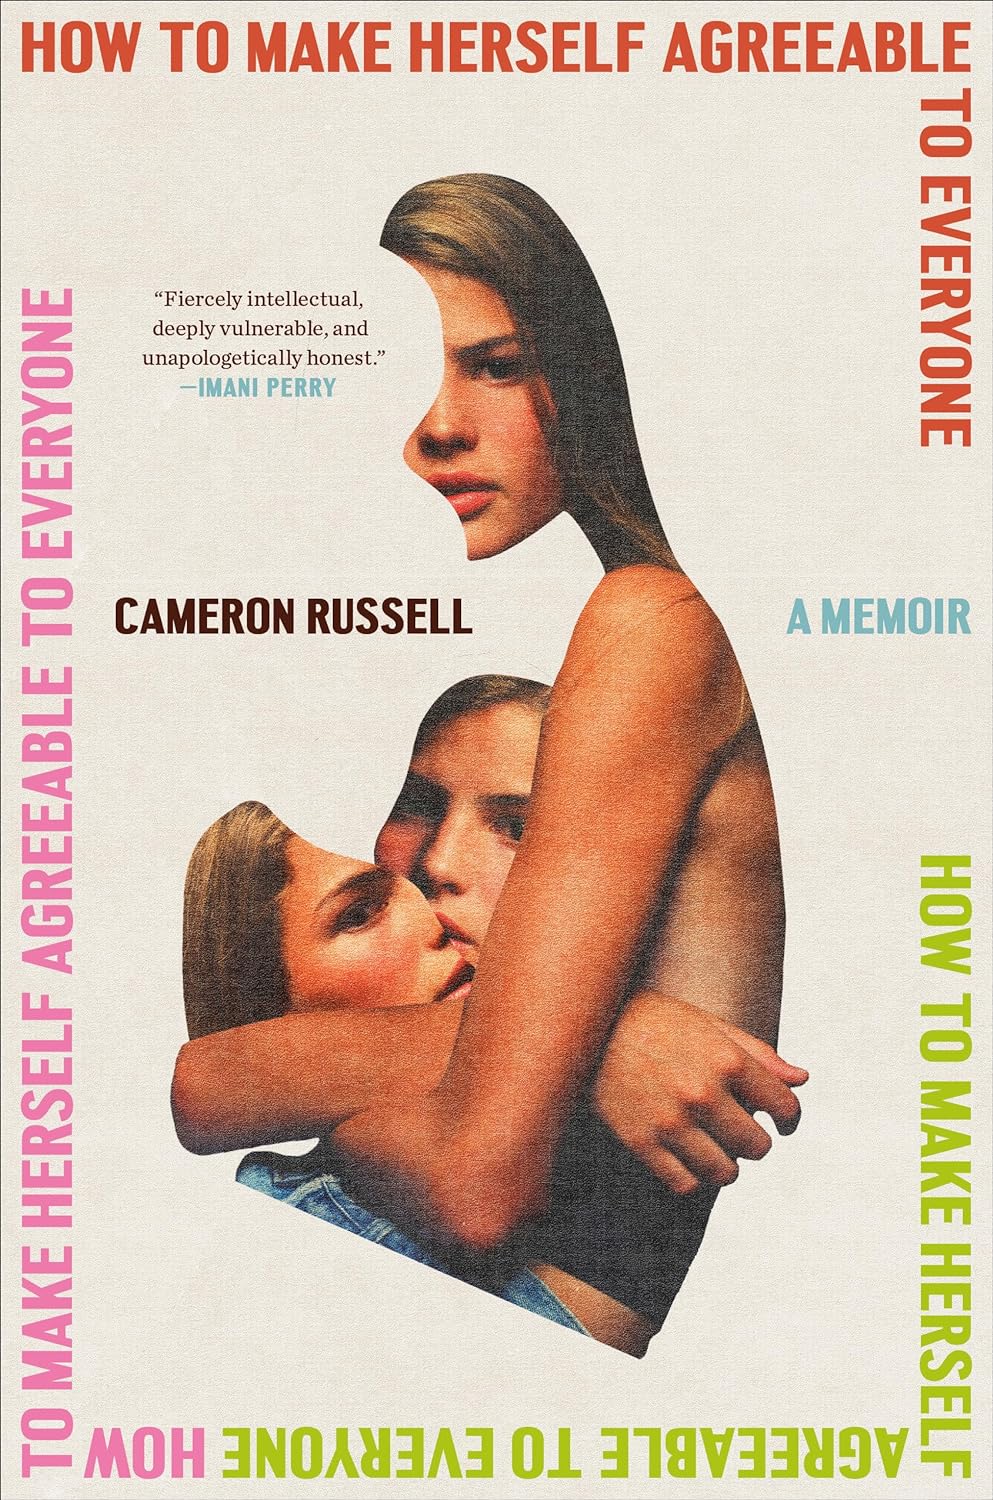 Cameron Russell, <em><a class="external" href=https://lithub.com/the-22-best-book-covers-of-march/"https://bookshop.org/a/132/9780593595480" target="_blank" rel="noopener">How to Make Herself Agreeable to Everyone: A Memoir</a></em>; cover design by Arsh Raziuddin, art direction by Rachel Ake (Random House, March 19) 